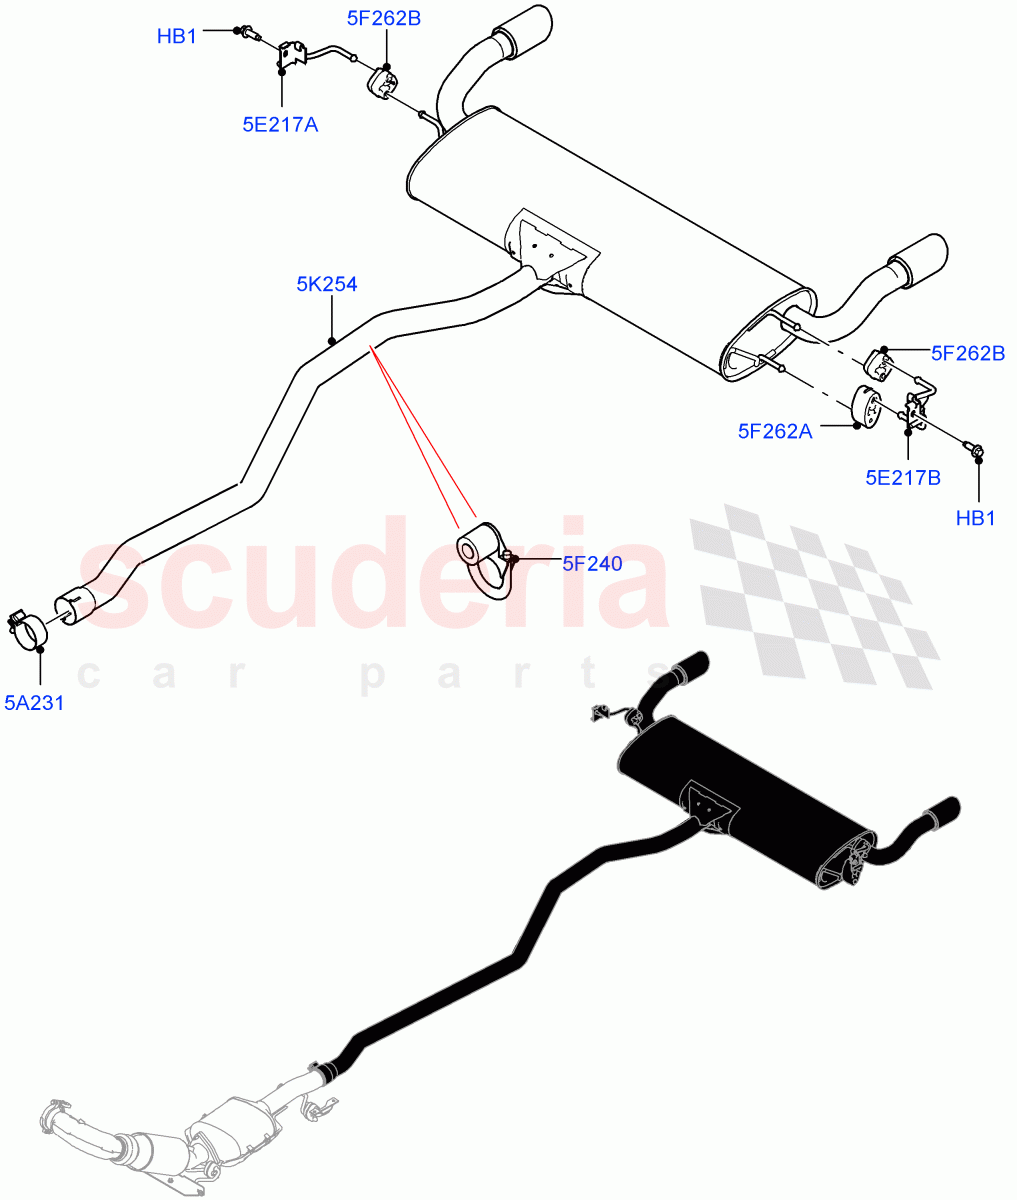 Rear Exhaust System(2.2L CR DI 16V Diesel,With 5 Seat Configuration) of Land Rover Land Rover Discovery Sport (2015+) [2.2 Single Turbo Diesel]